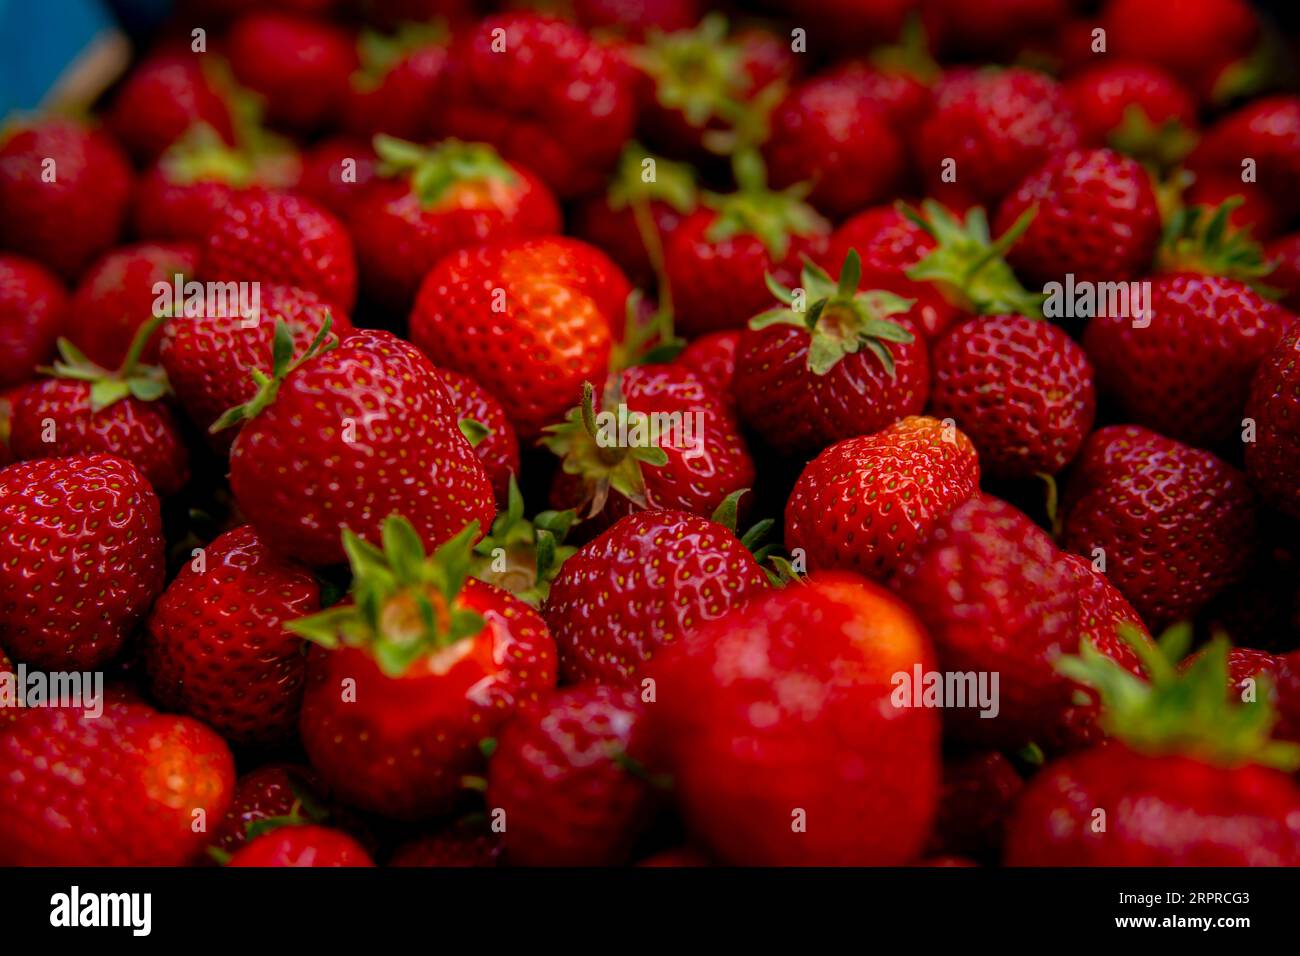 detail of red and fresh strawberies Stock Photo